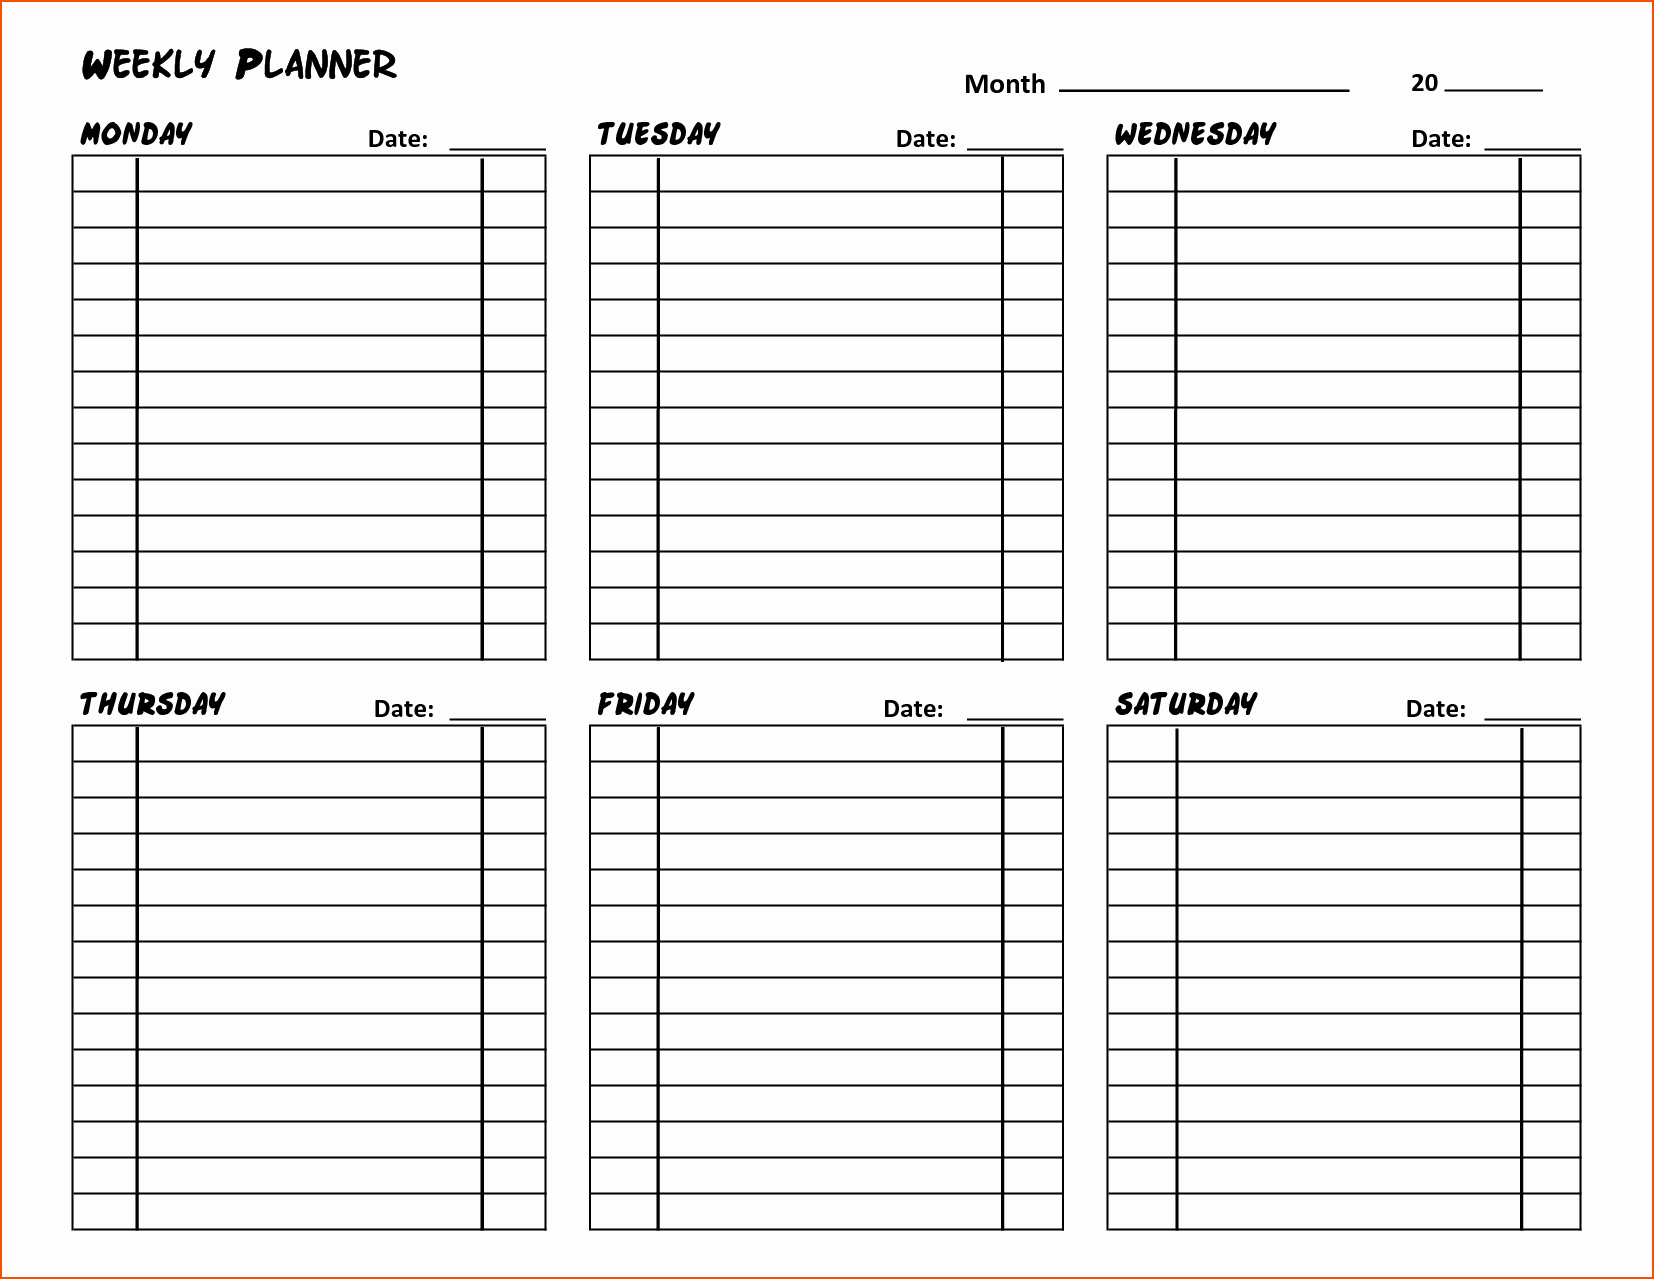 Menu Planner Template Excel Inspirational 3 Weekly Planning Template Bookletemplate